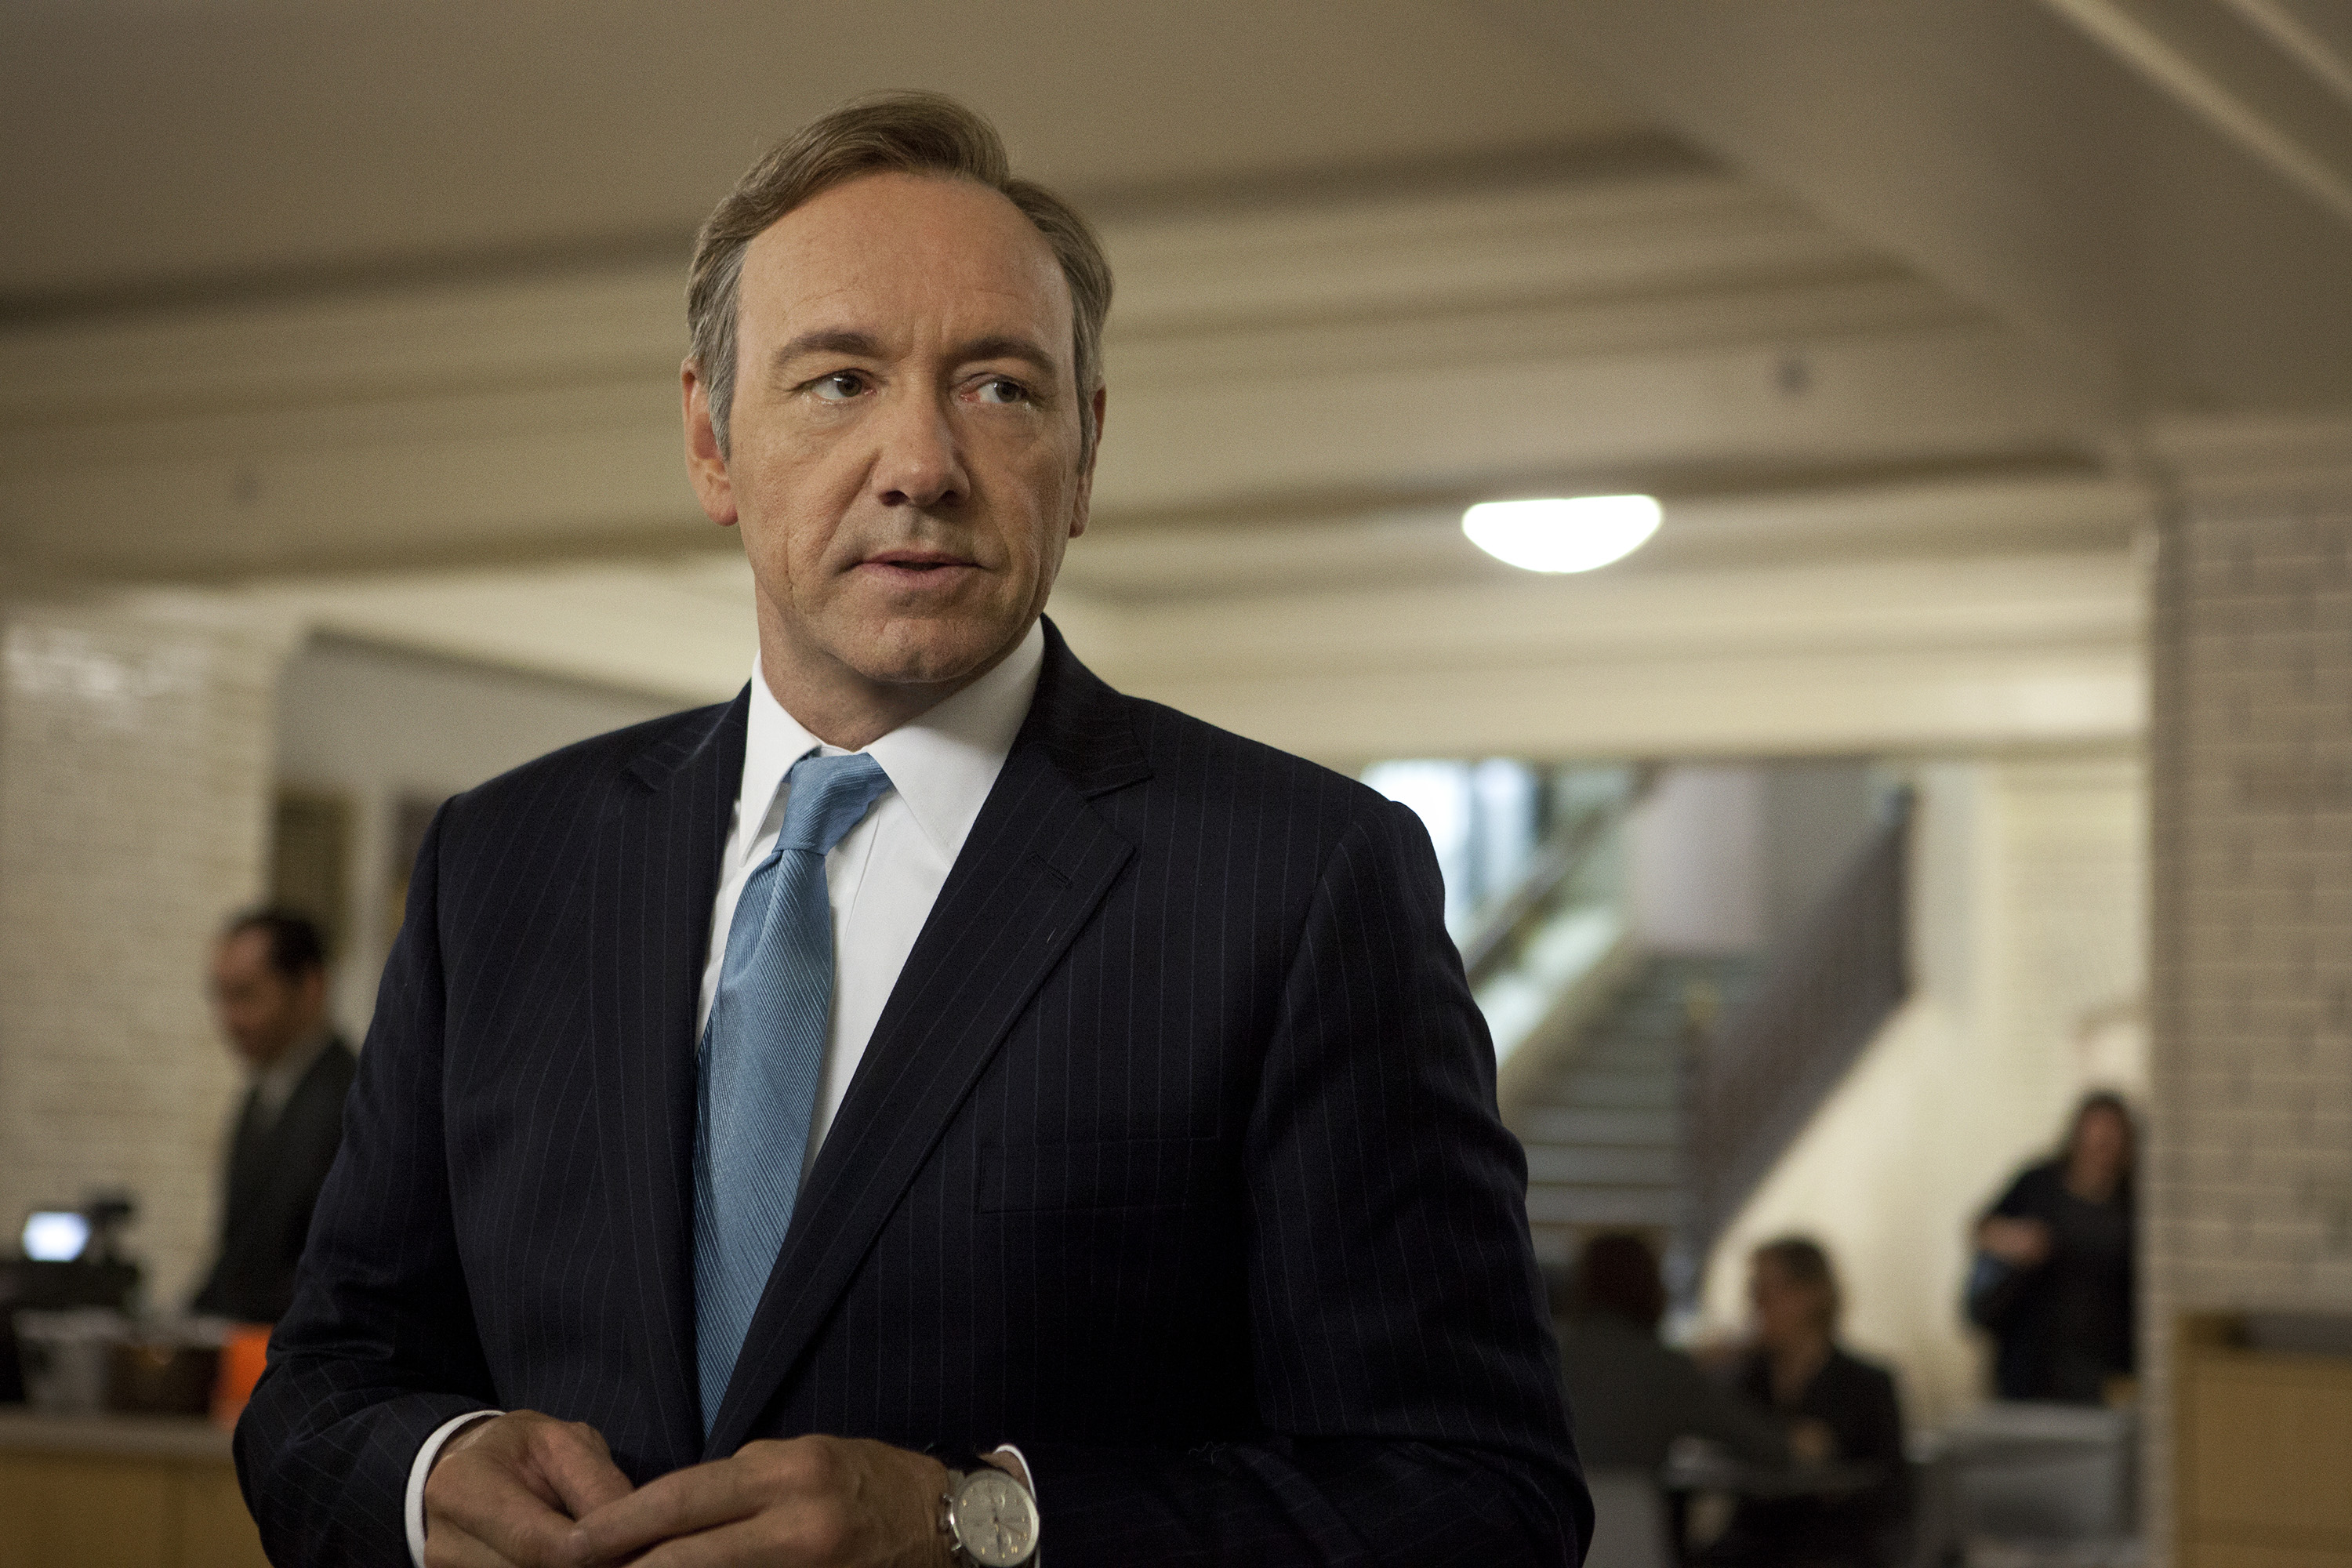 Kevin Spacey Backgrounds, Compatible - PC, Mobile, Gadgets| 3000x2000 px